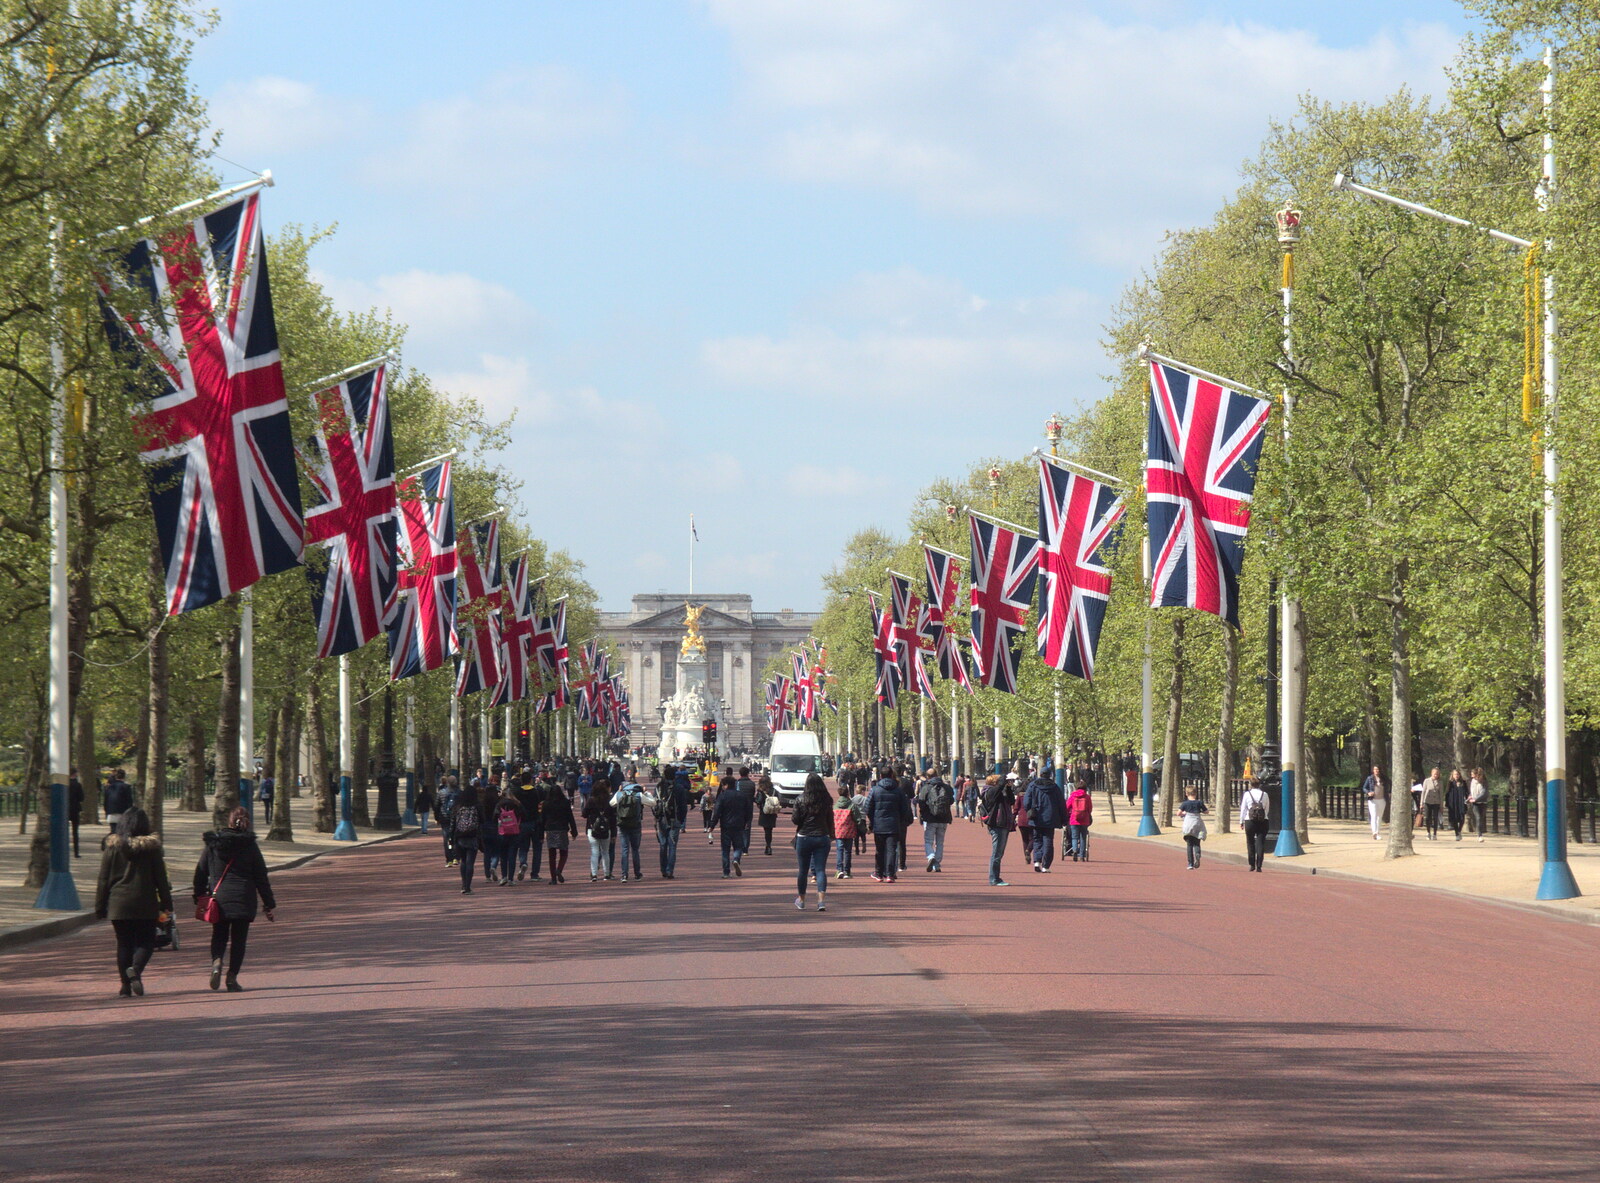 The flags are out on the Mall in London from A Trip to Reykjavik, Iceland - 20th April 2017